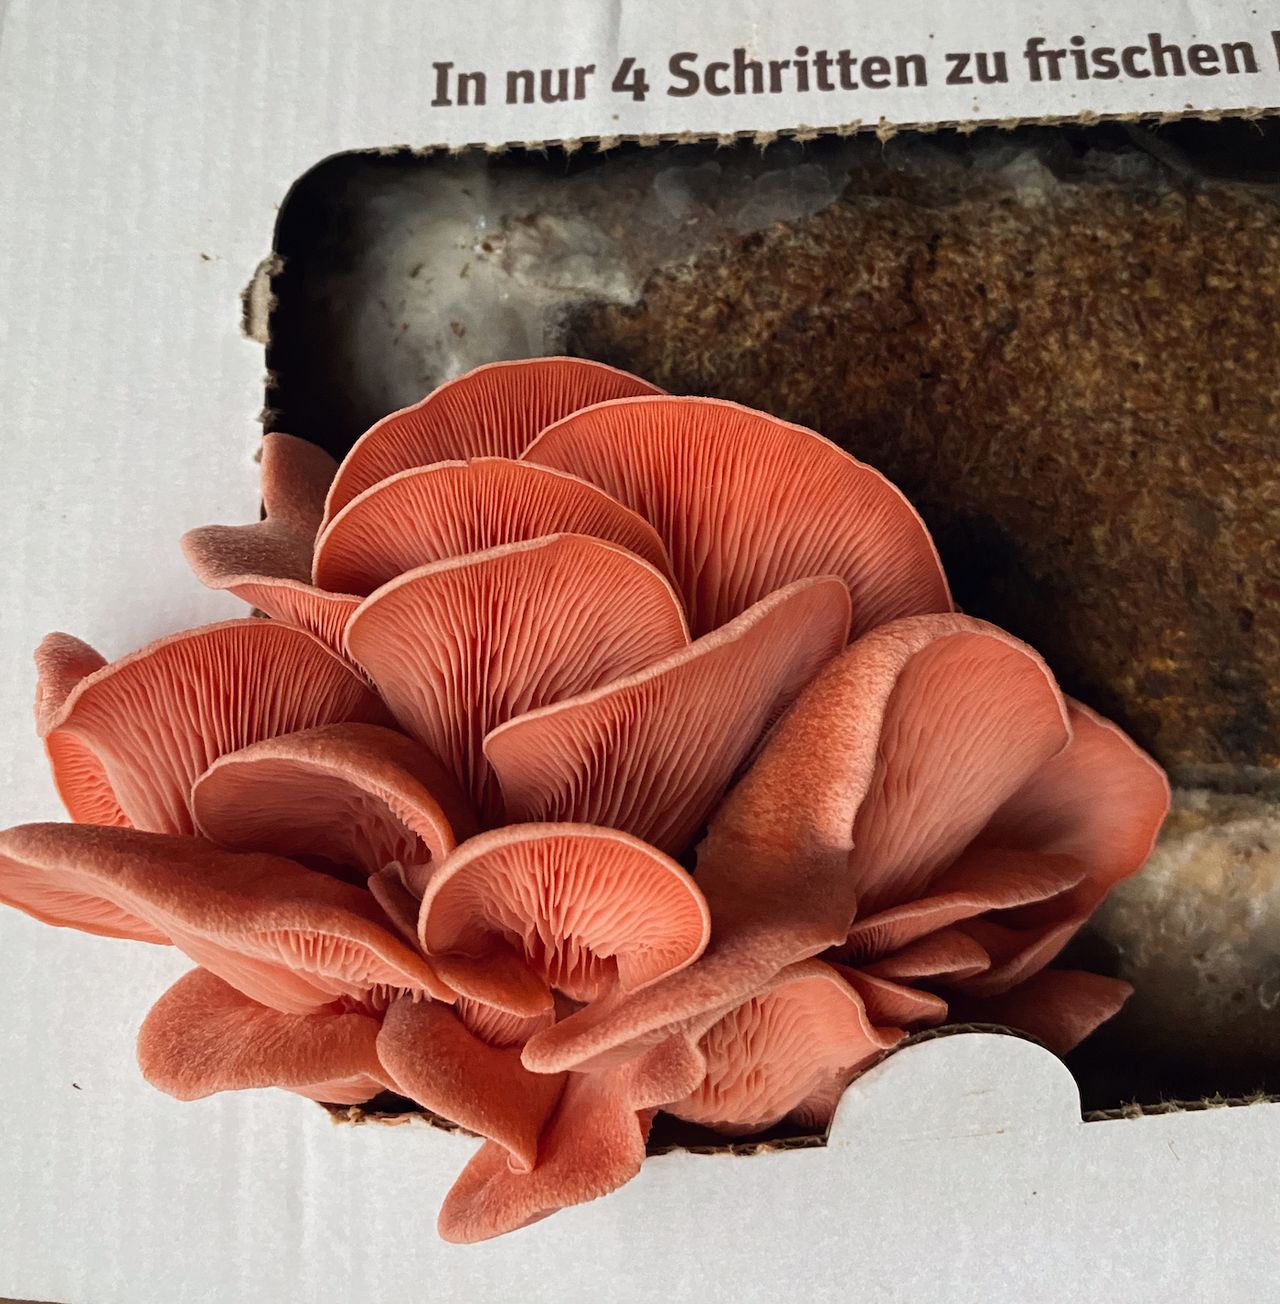 Pink oyster mushrooms blooming out of spawn inside a box that says 'Only four steps to fresh mushrooms'